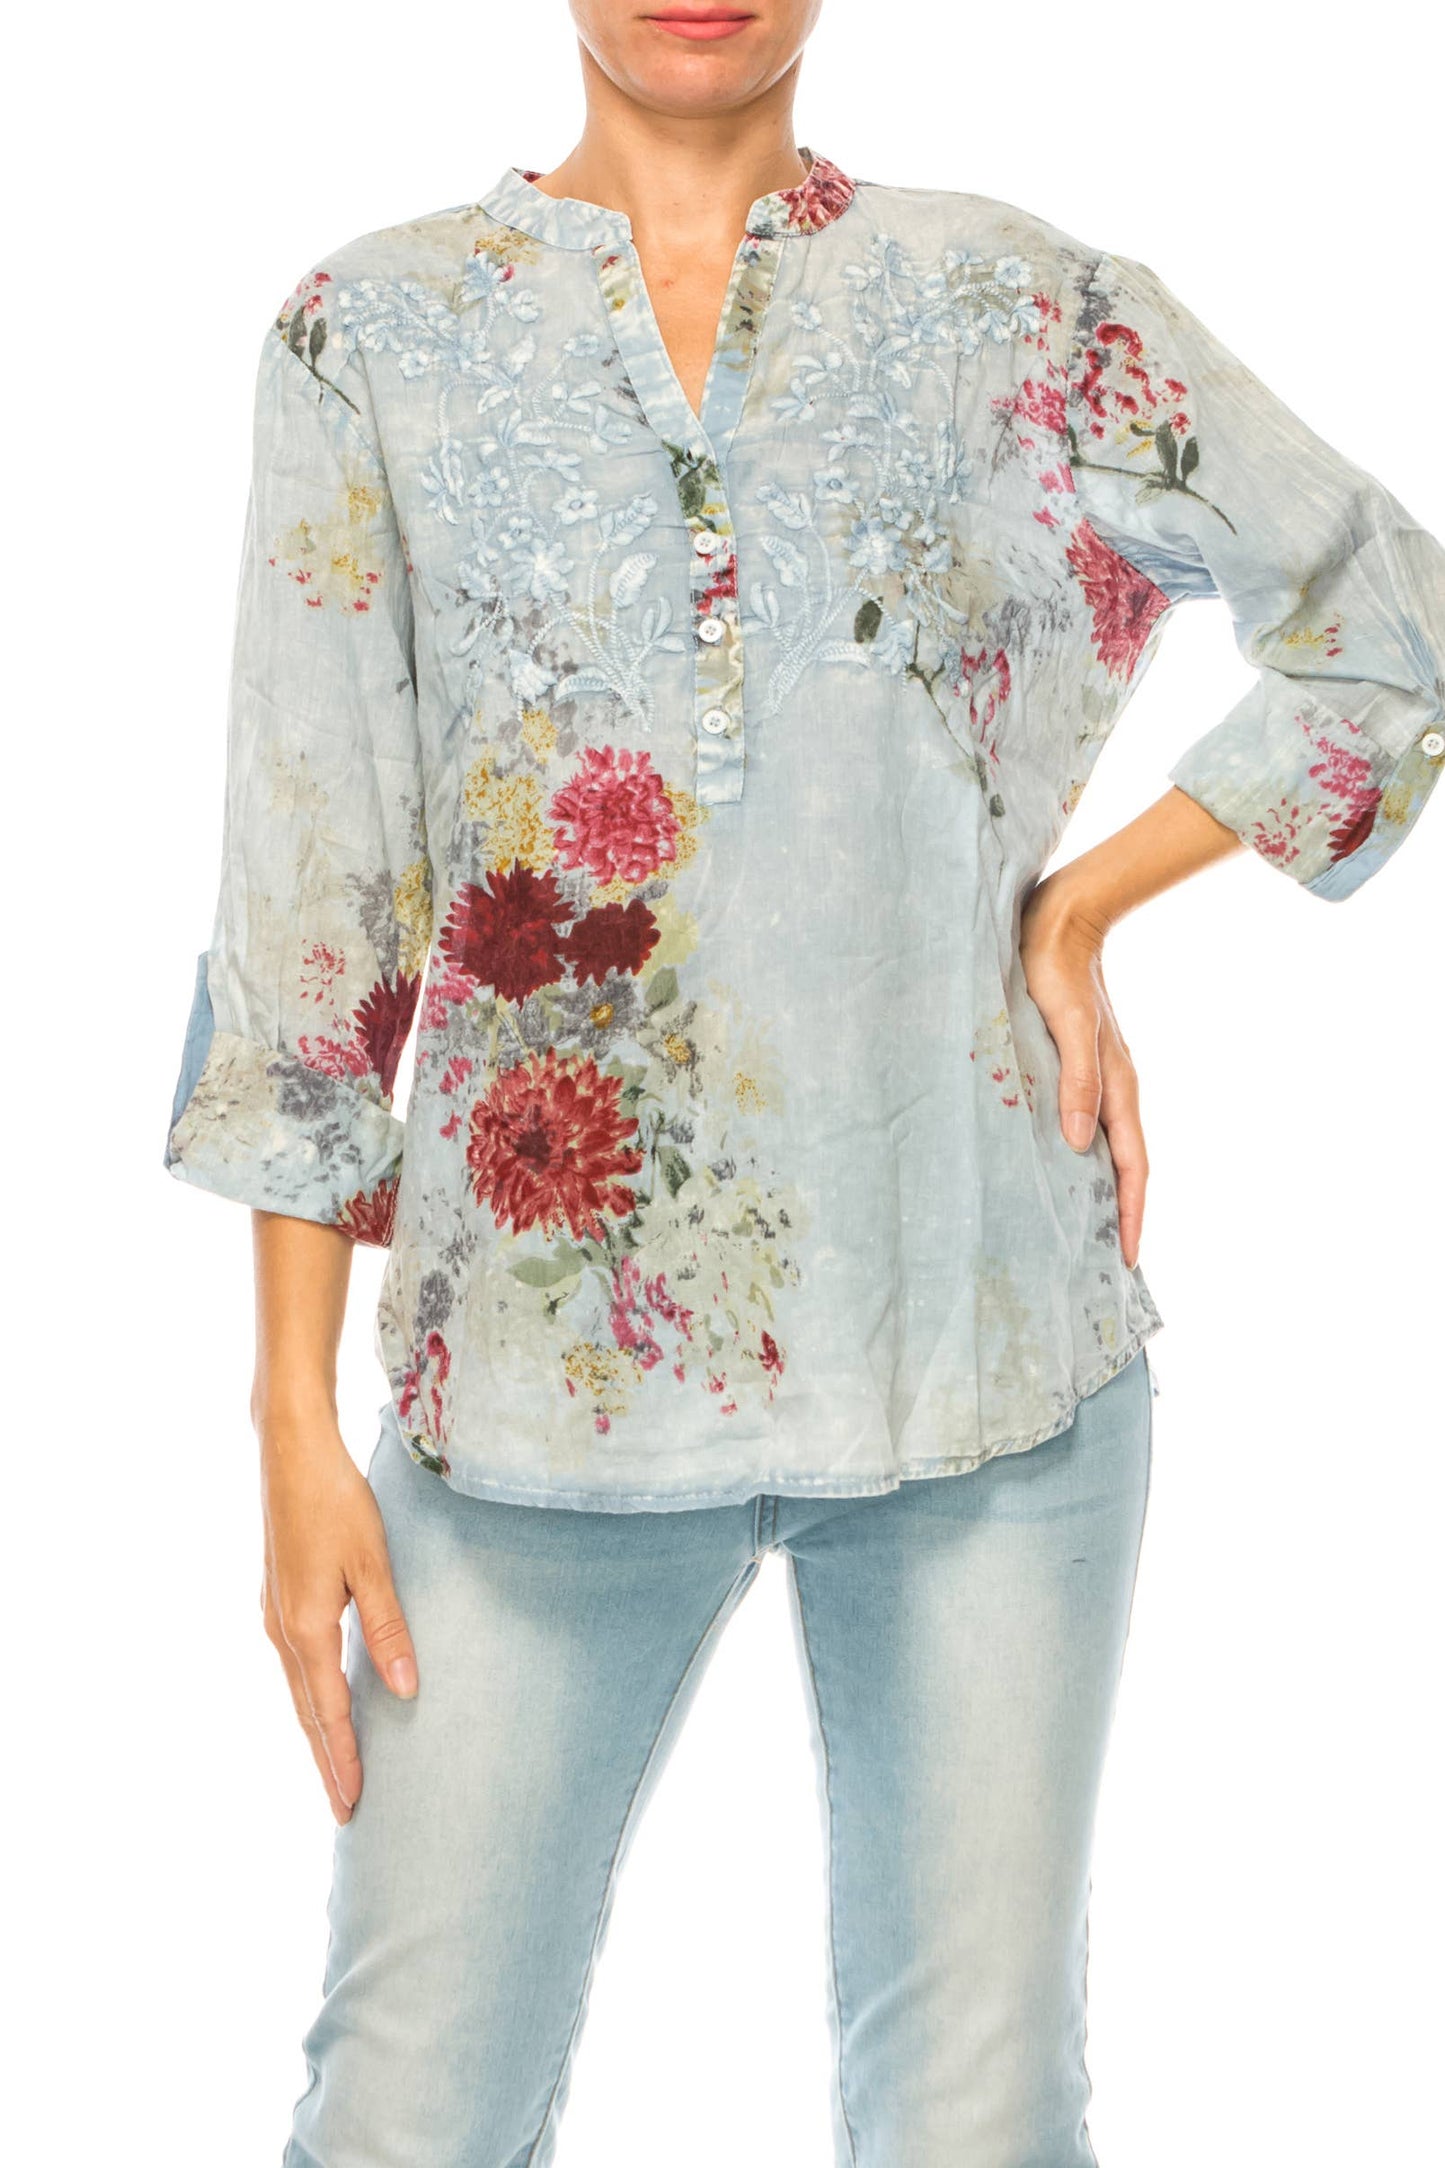 Vintage Light Blue Floral Printed Tunic with Embroidery